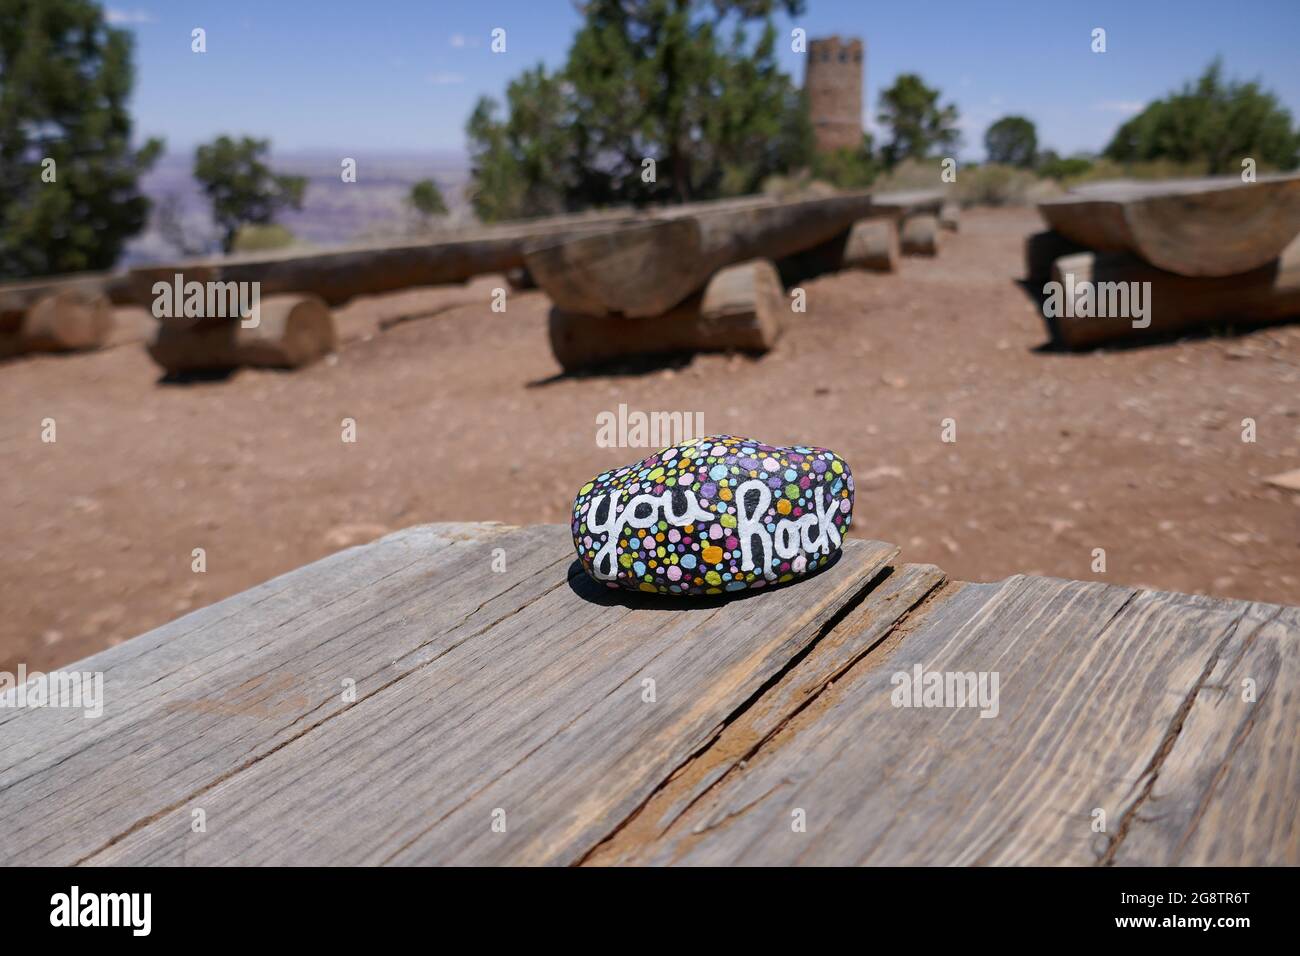 Wooden table with kindness rock Stock Photo